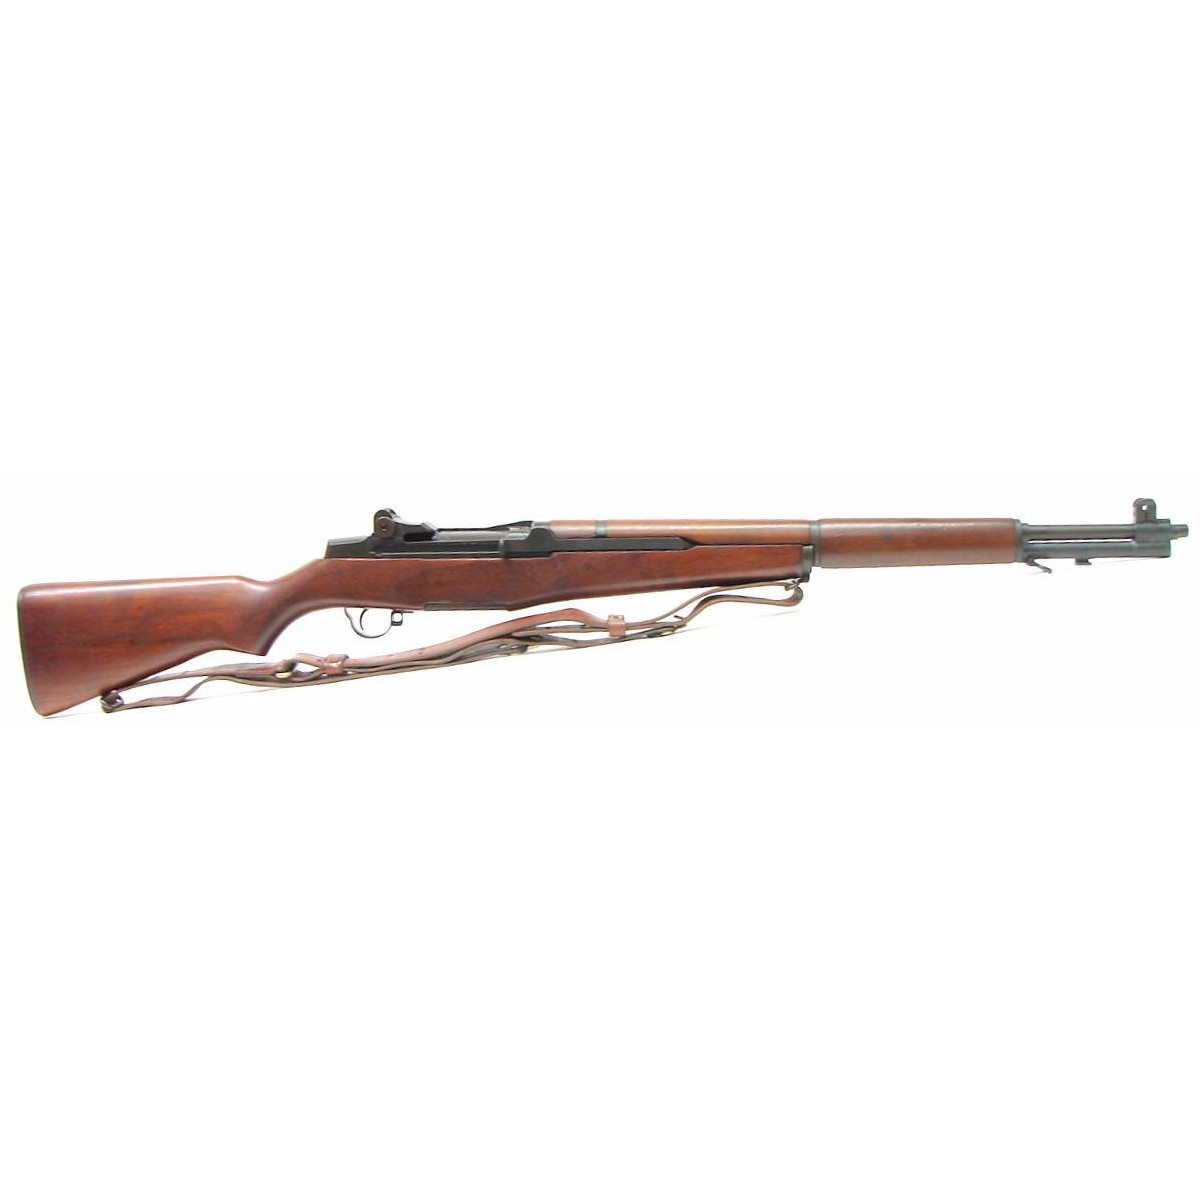 https://www.collectorsfirearms.com/739427-large_default/ld-armory-m1-garand-30-06-caliber-rifle-in-the-6-million-serial-number-range-mint-barrel-dated-august-1956-and-marked-r11741.jpg